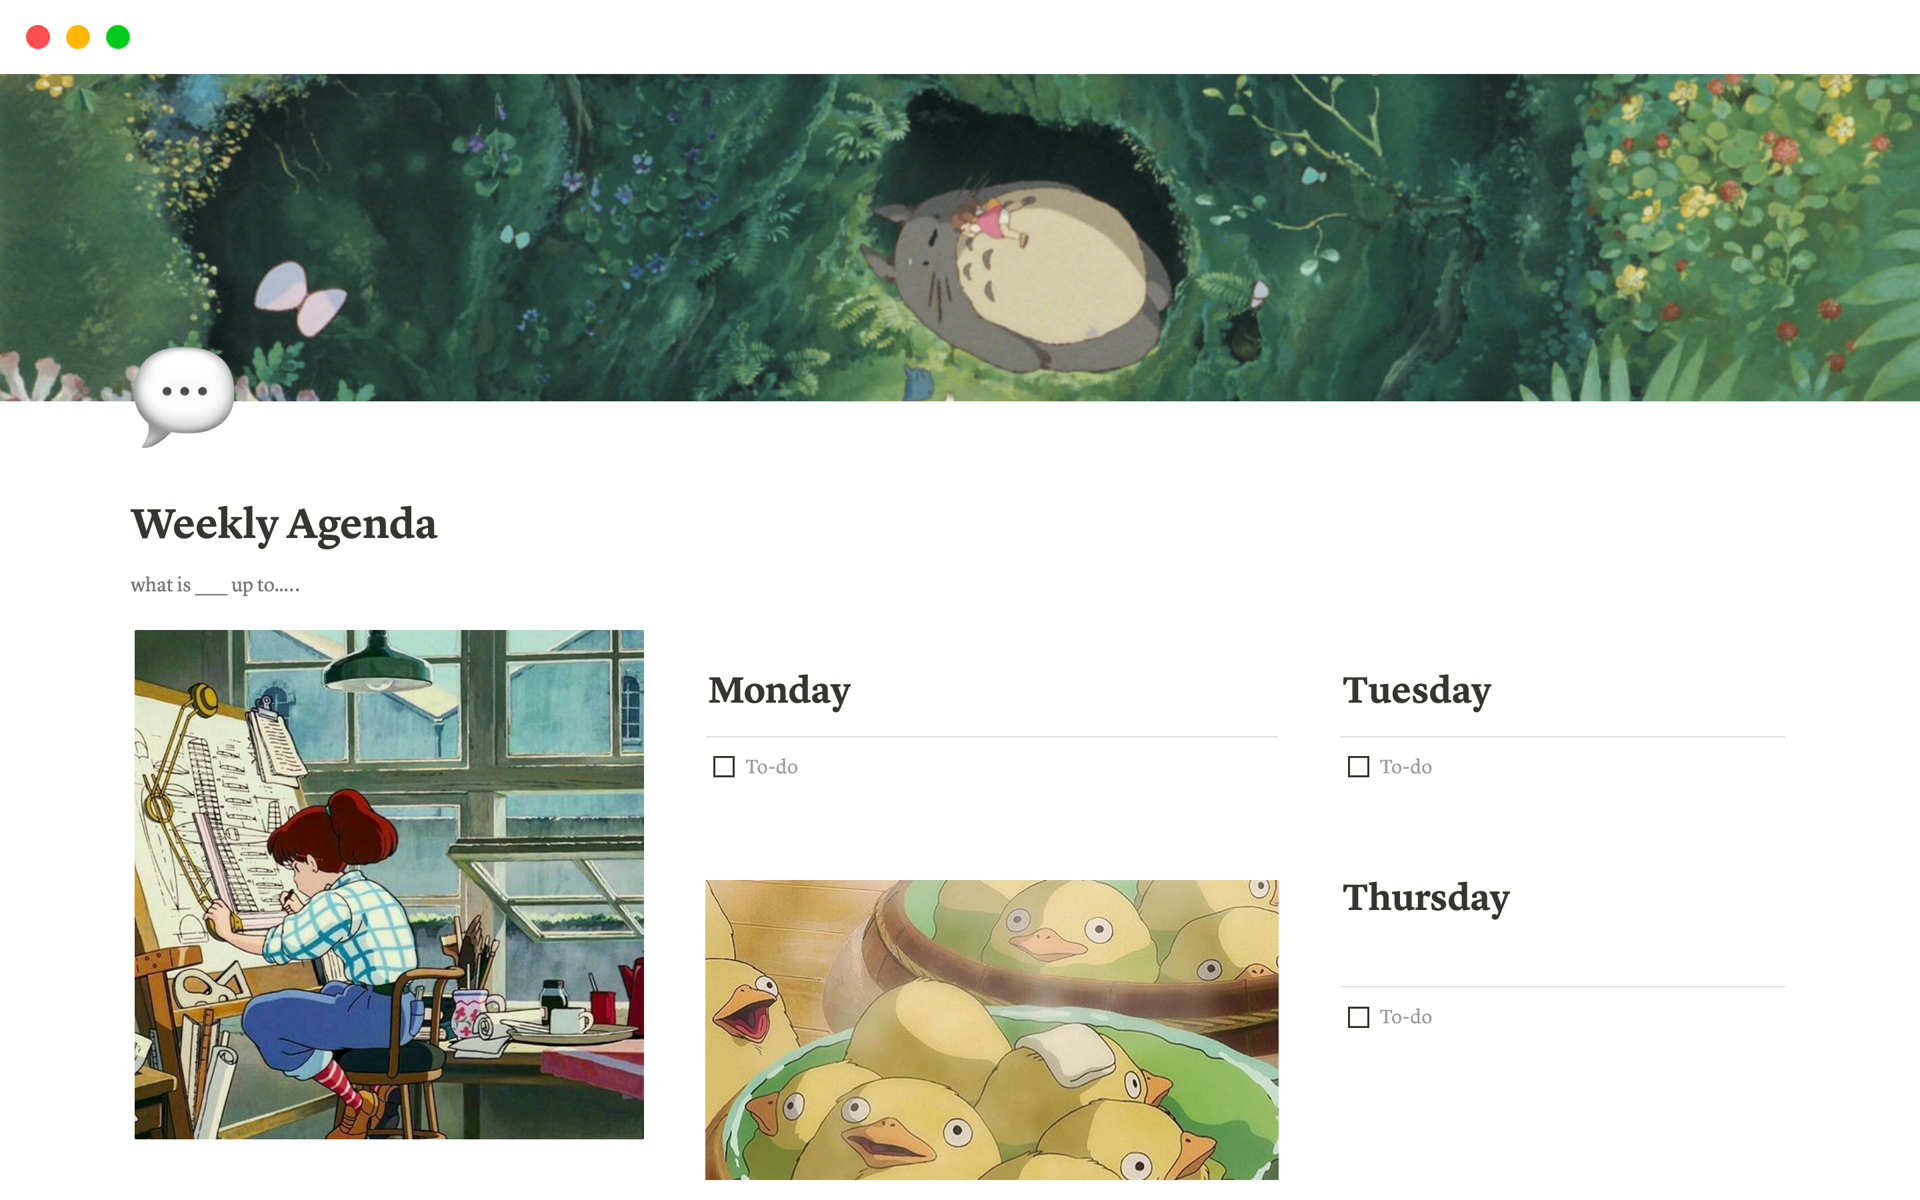 A Studio Ghibli inspired weekly to do list to help you stay on track!